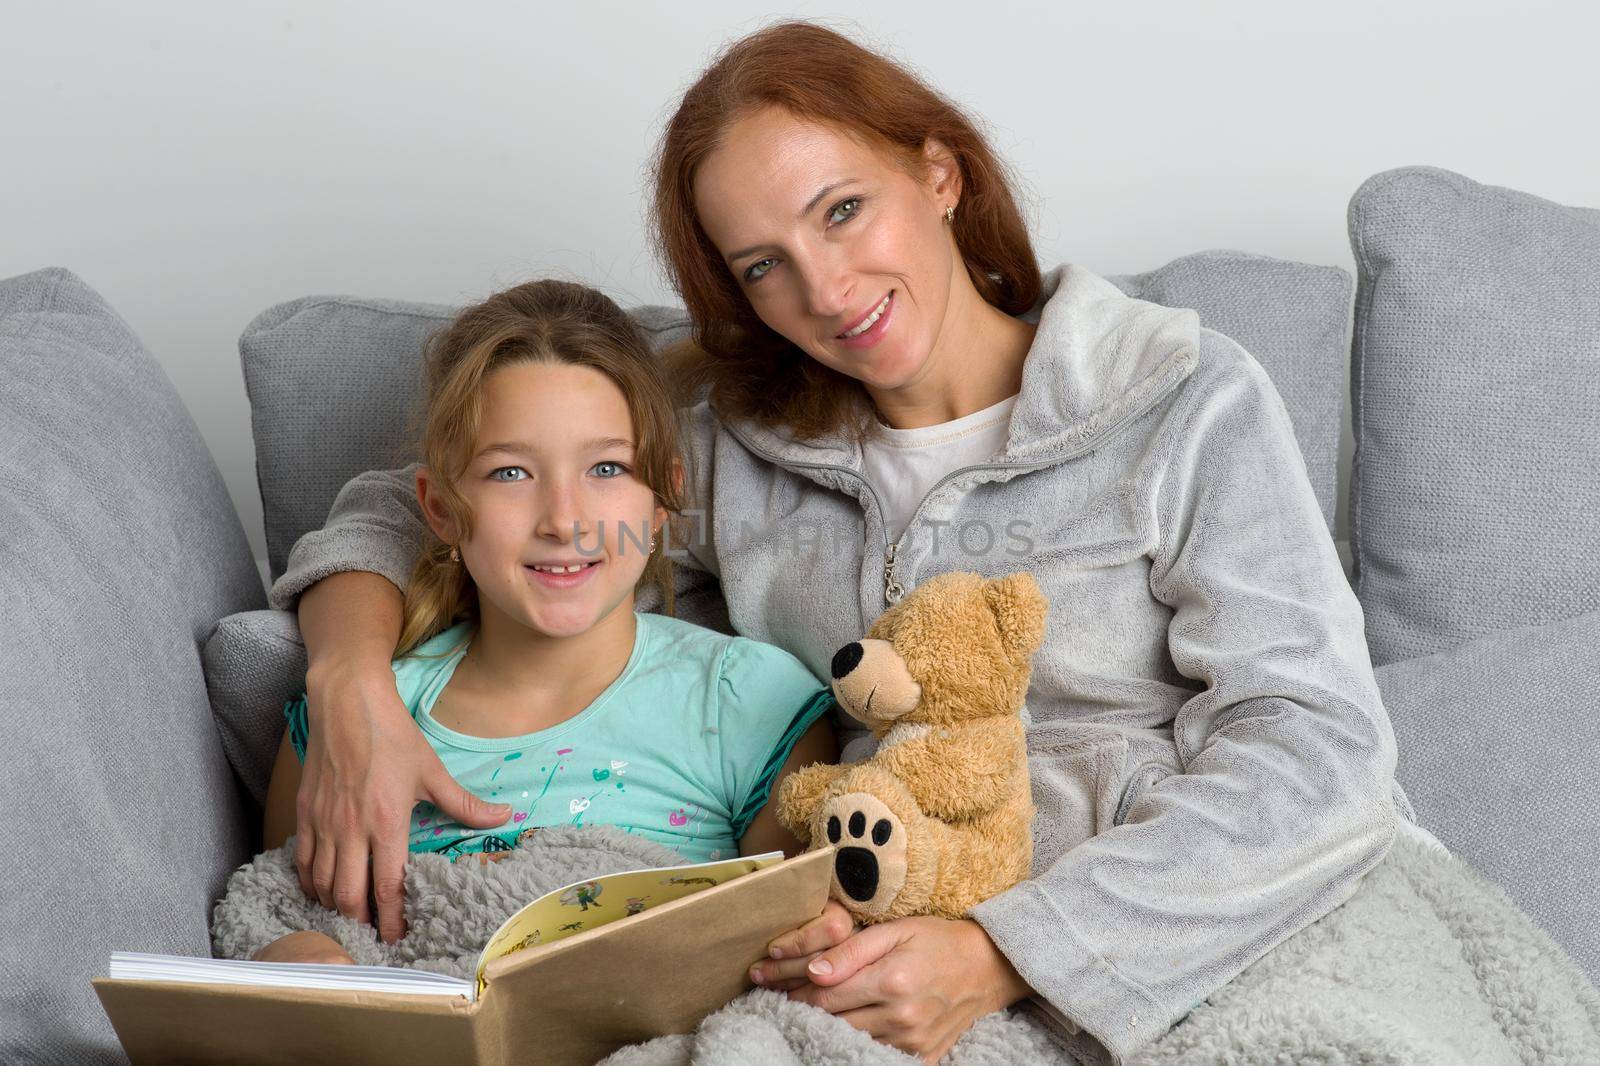 Mom sitting on couch with her daughter and reading book. Smiling loving mother hugging her daughter who sitting with teddy bear toy. Woman and child wearing indoor clothes sitting together